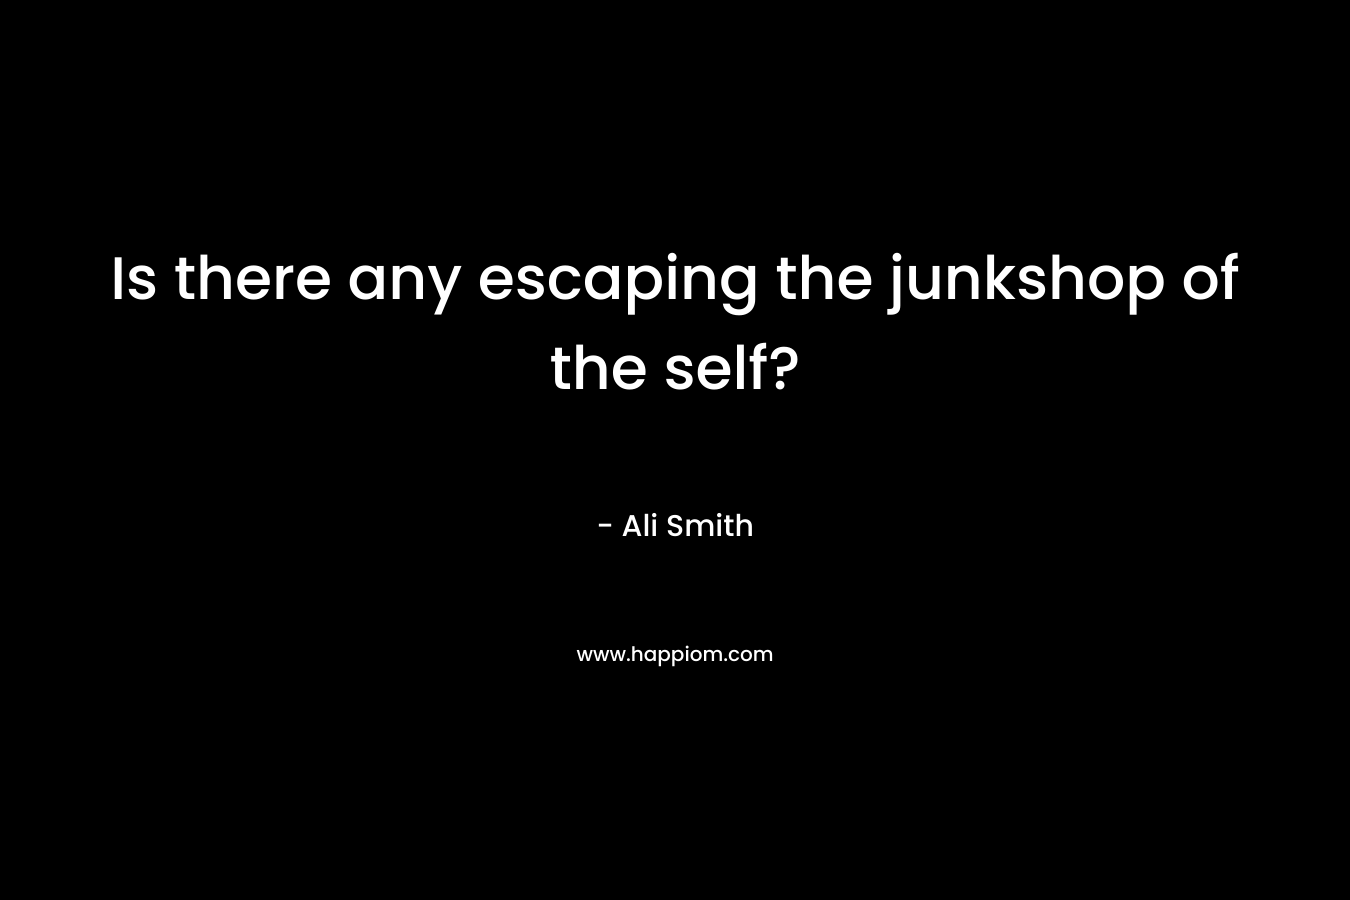 Is there any escaping the junkshop of the self?